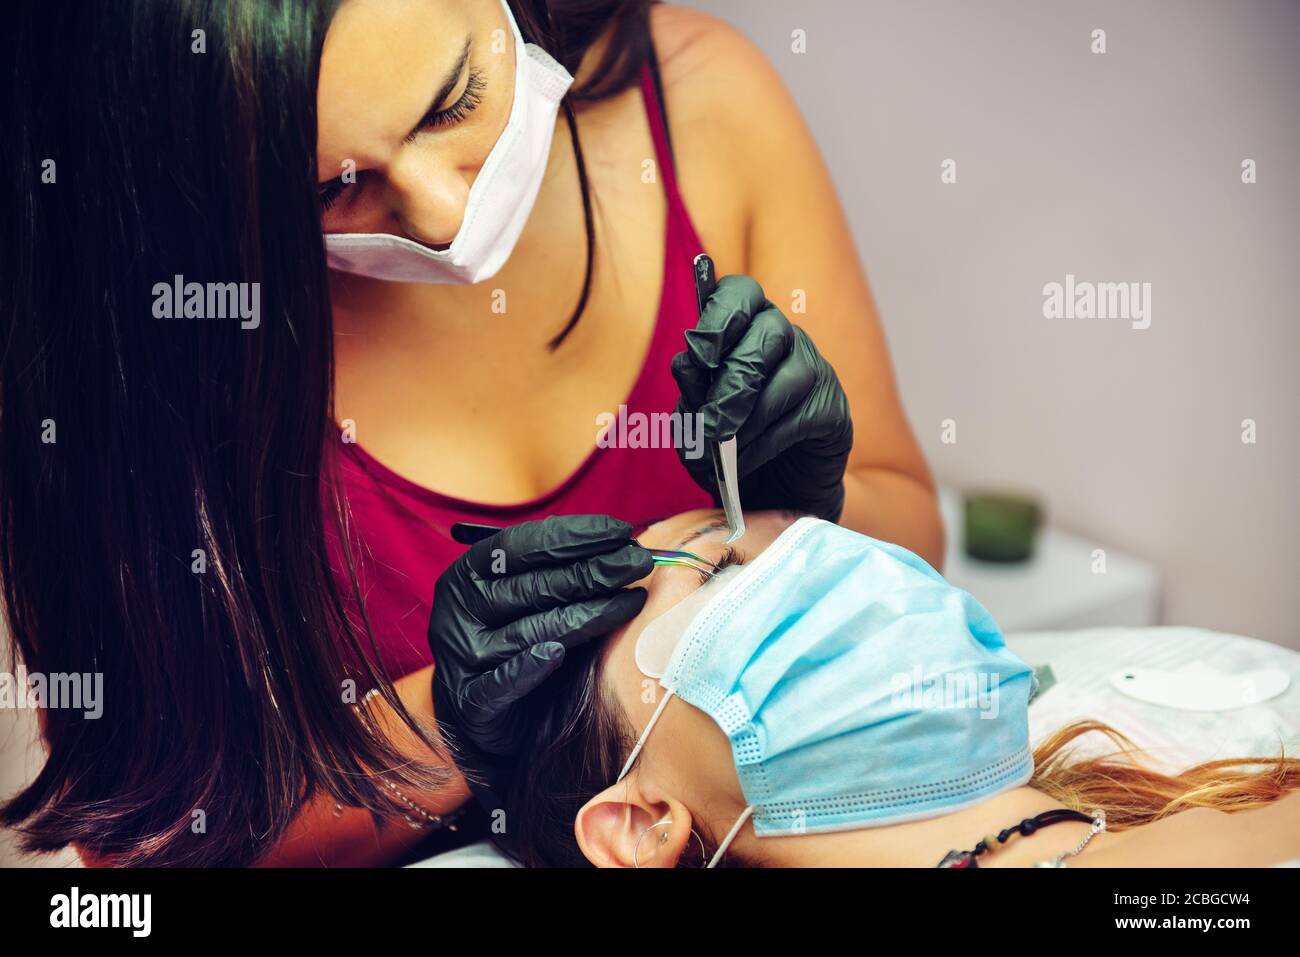 woman putting false eyelashes to lady in beauty salon with masks, new normal Stock Photo